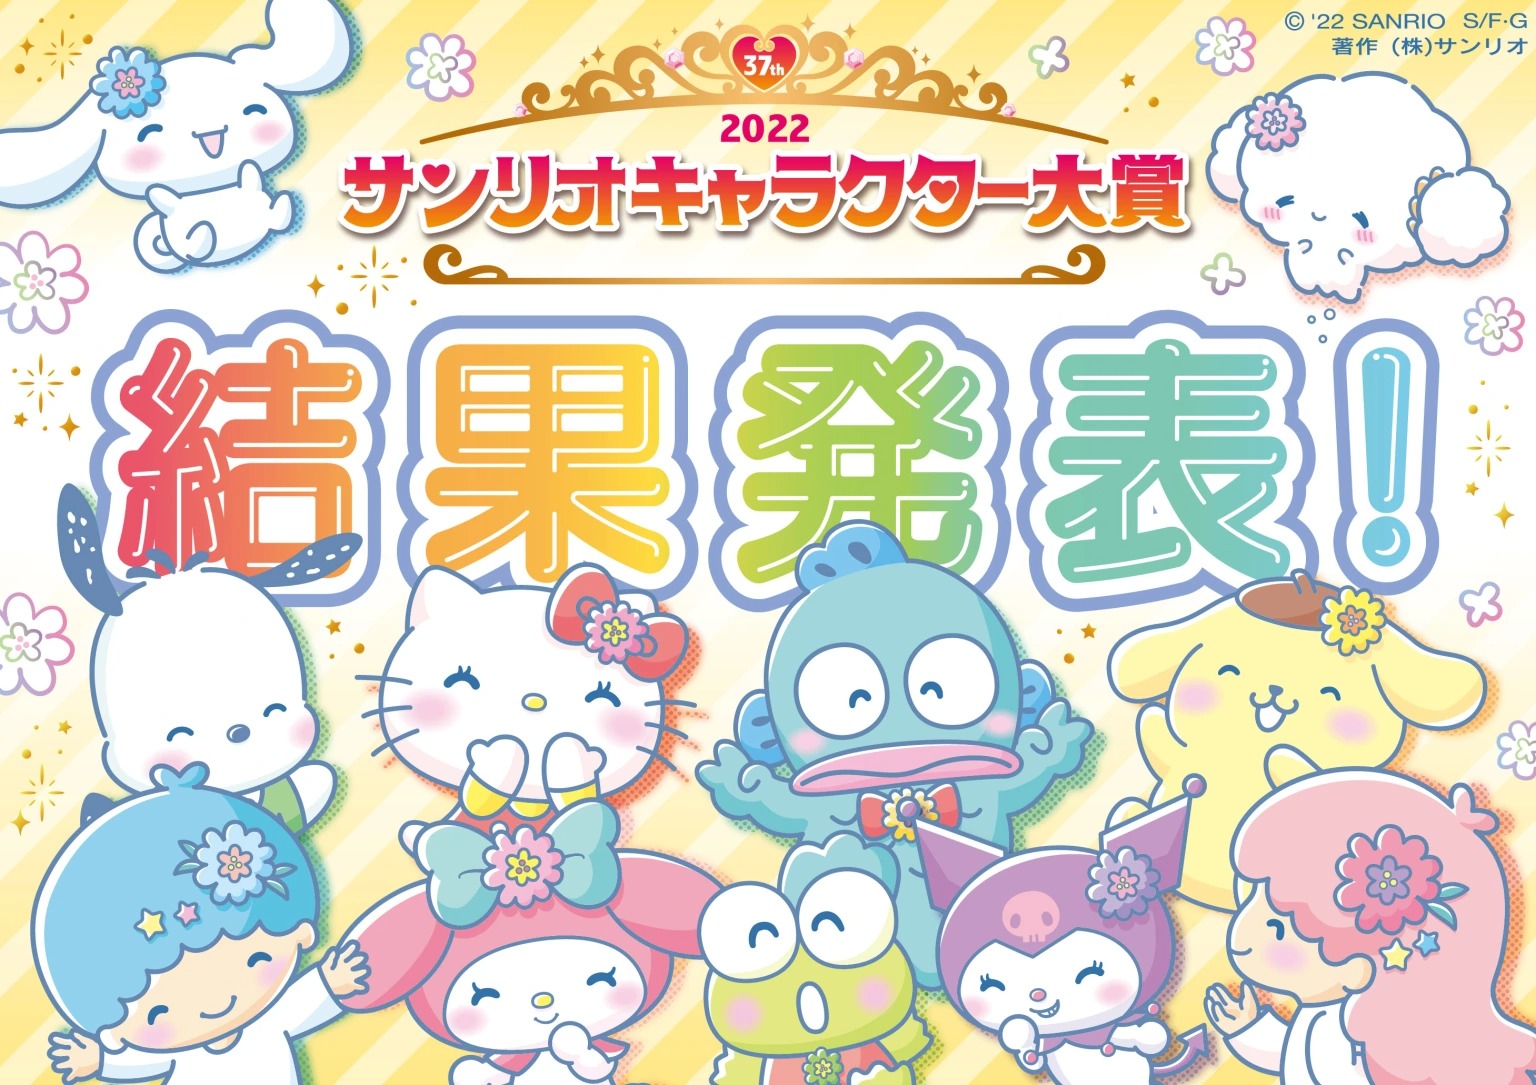 The 32nd Sanrio Character Ranking Official Website